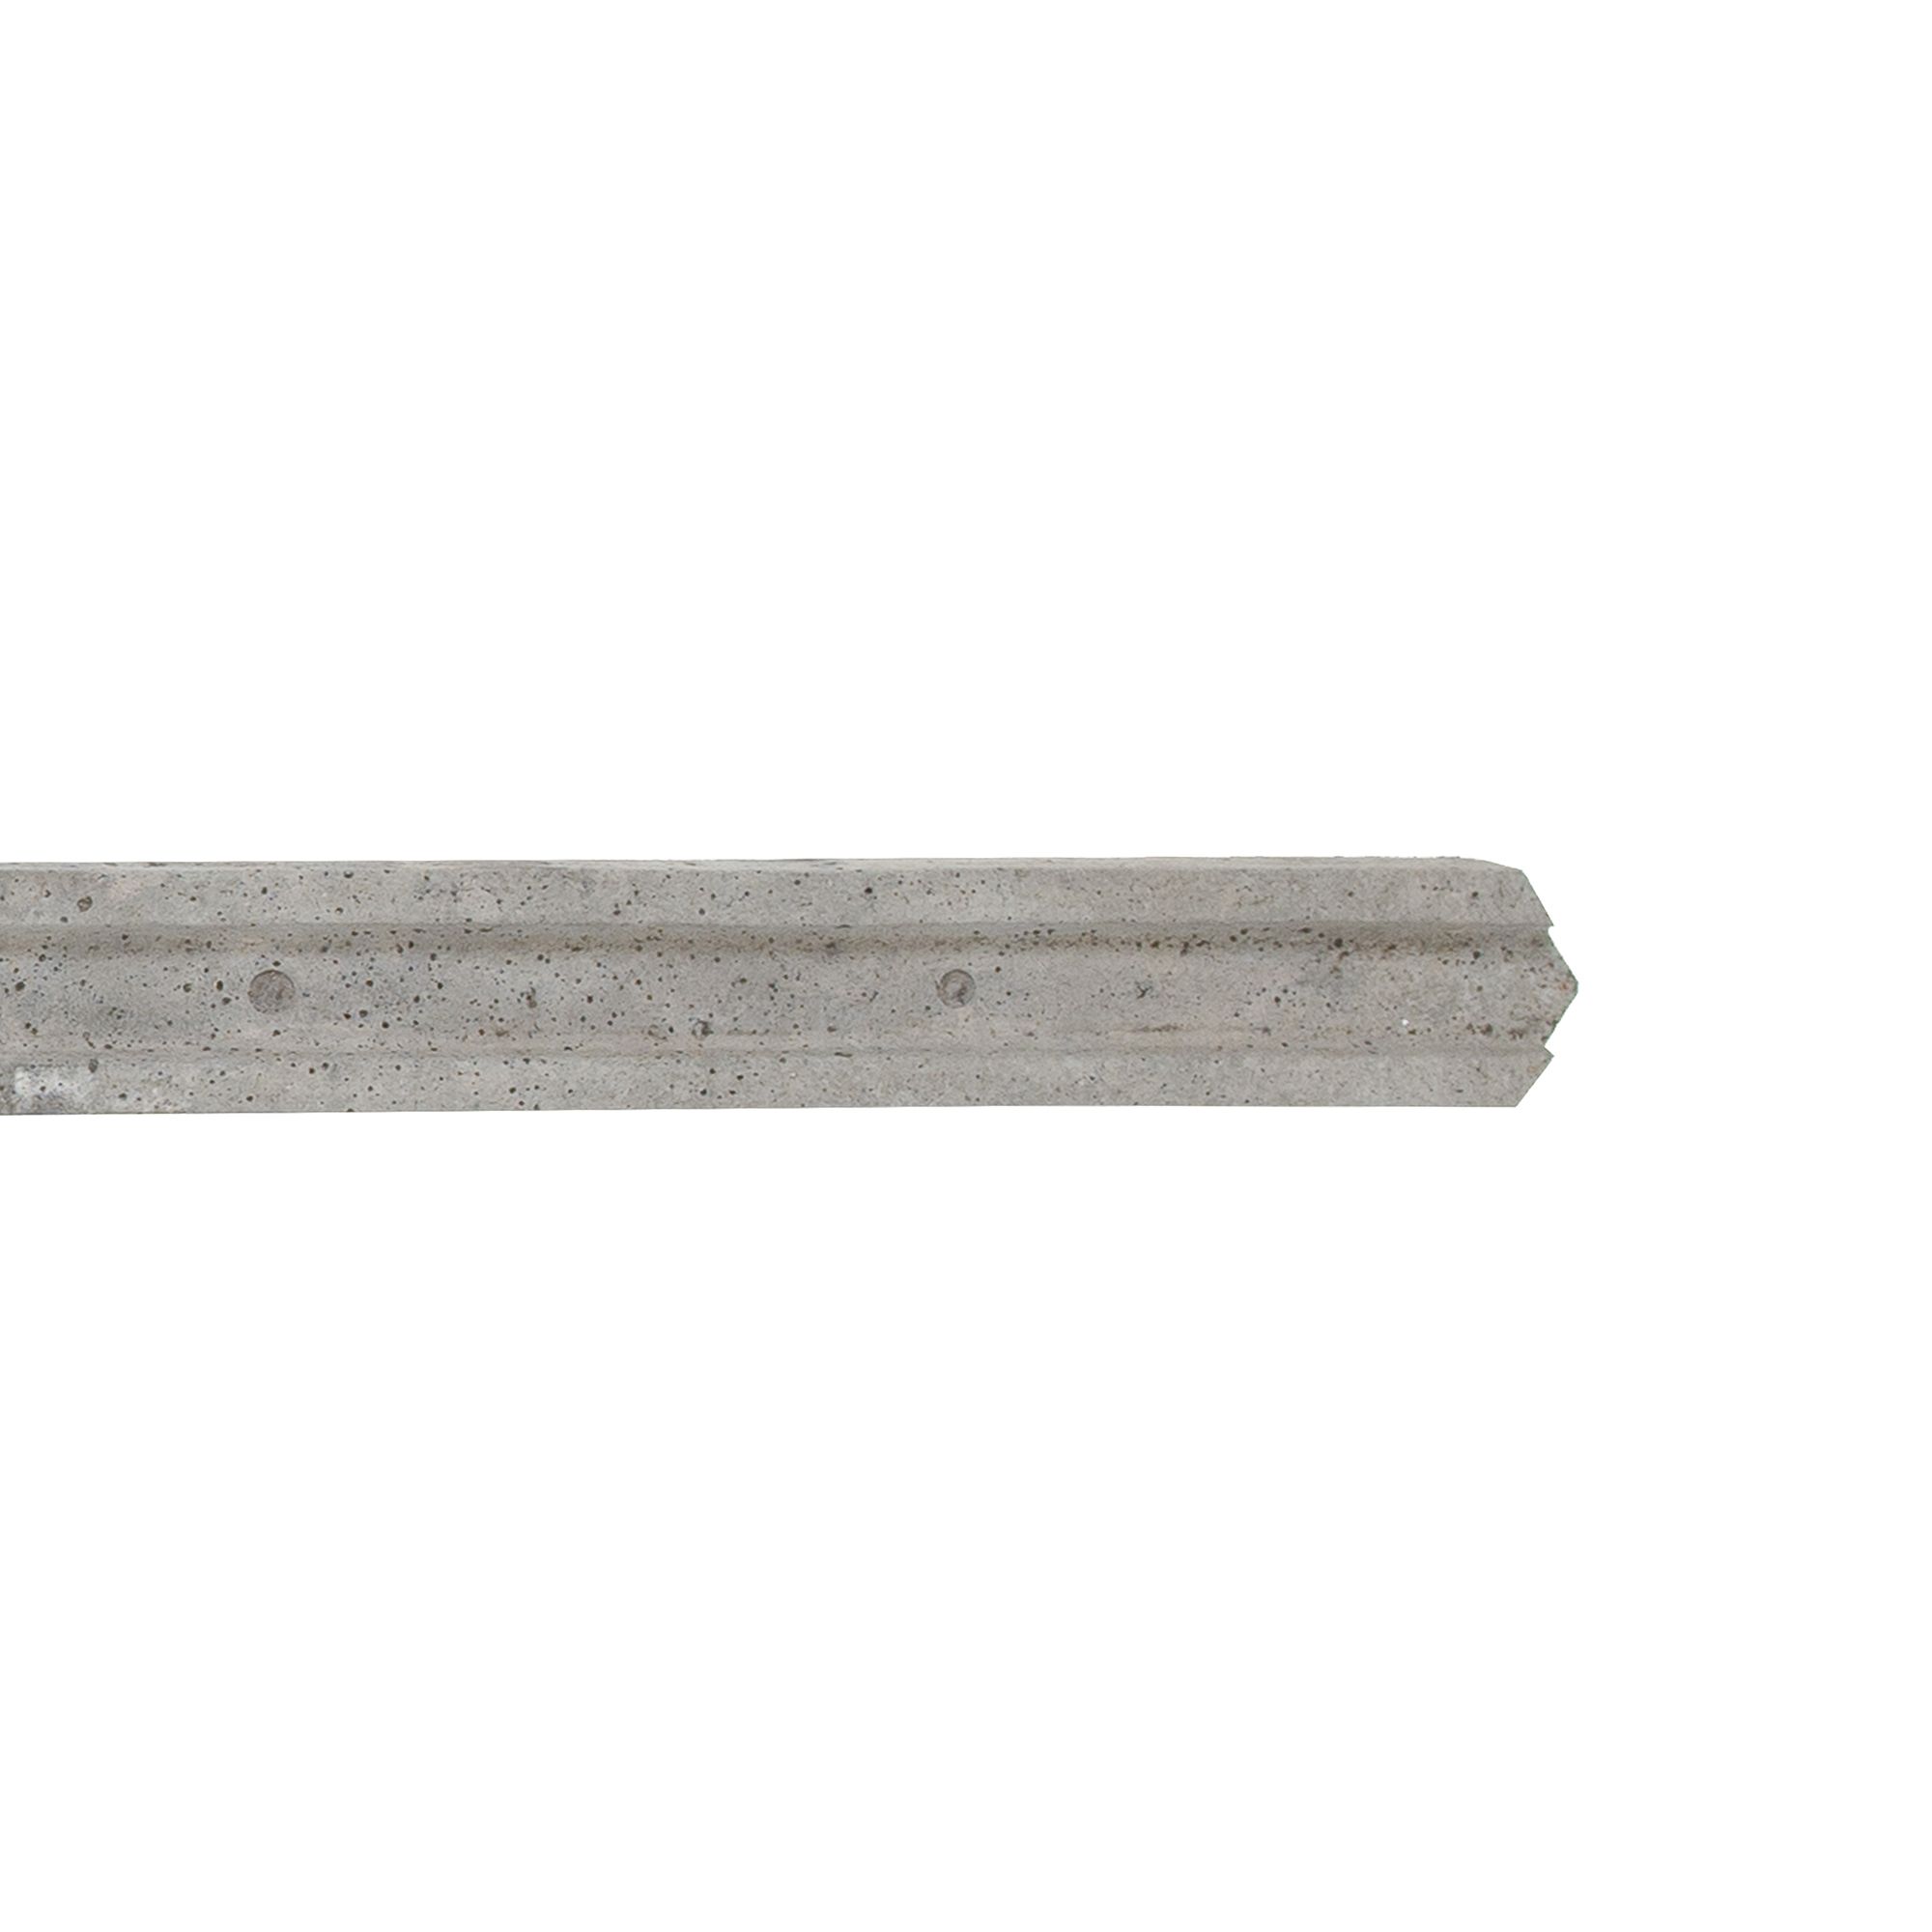 Forest Garden Grey Slotted Square Concrete Fence post (H)2.36m (W)84mm, Pack of 10